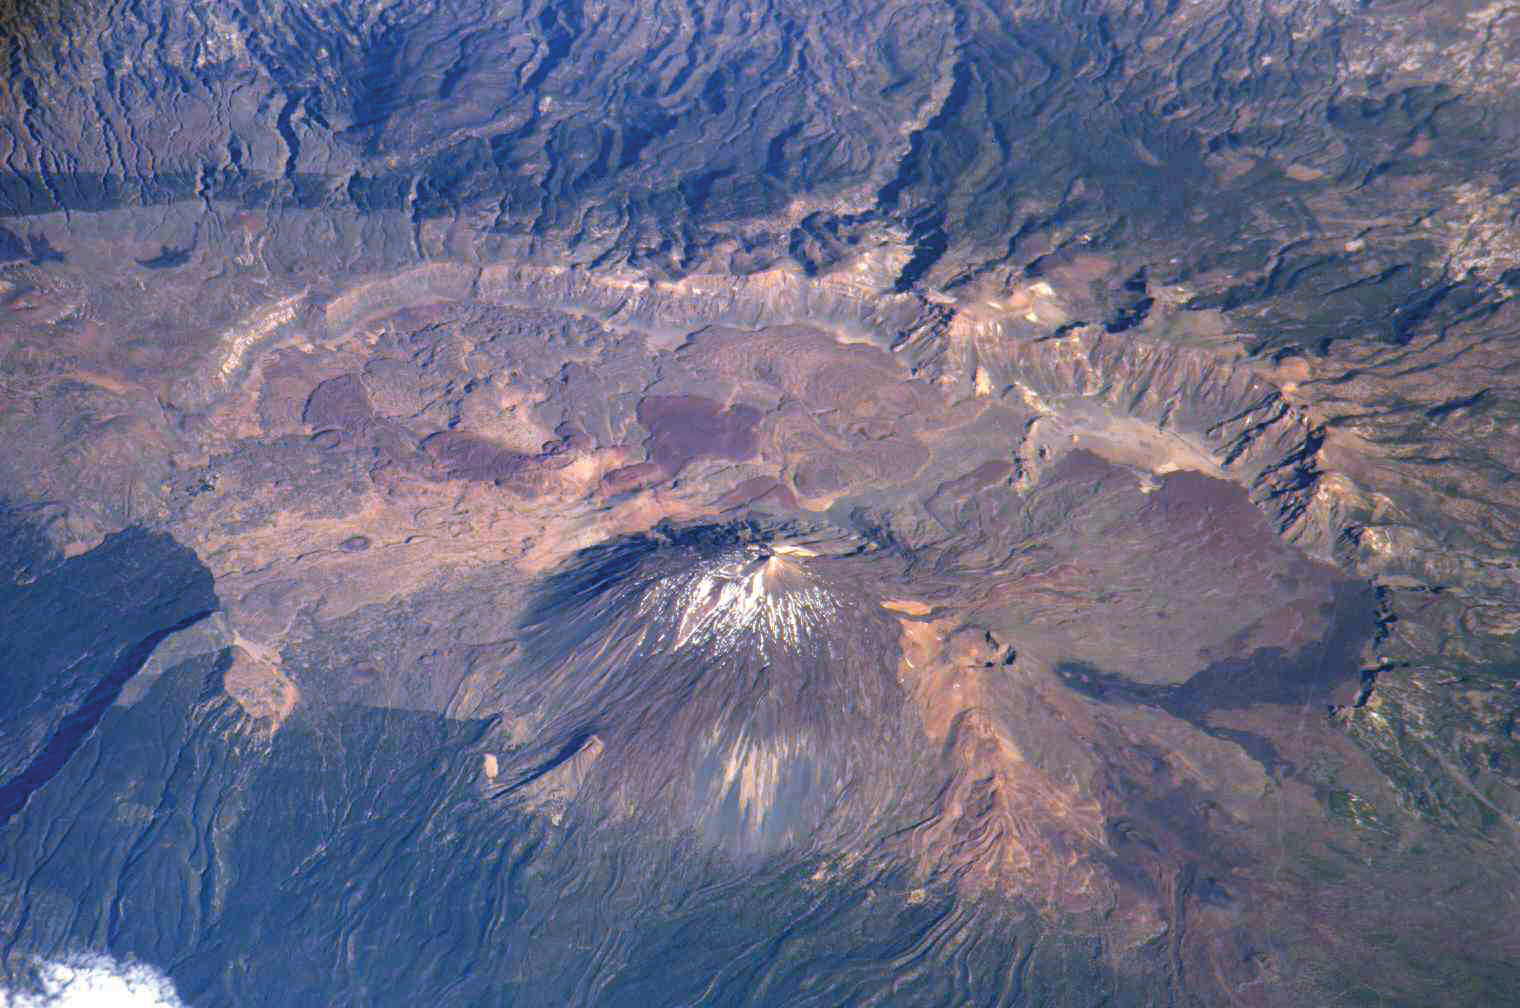 image of a volcano and mountainous region on Earth